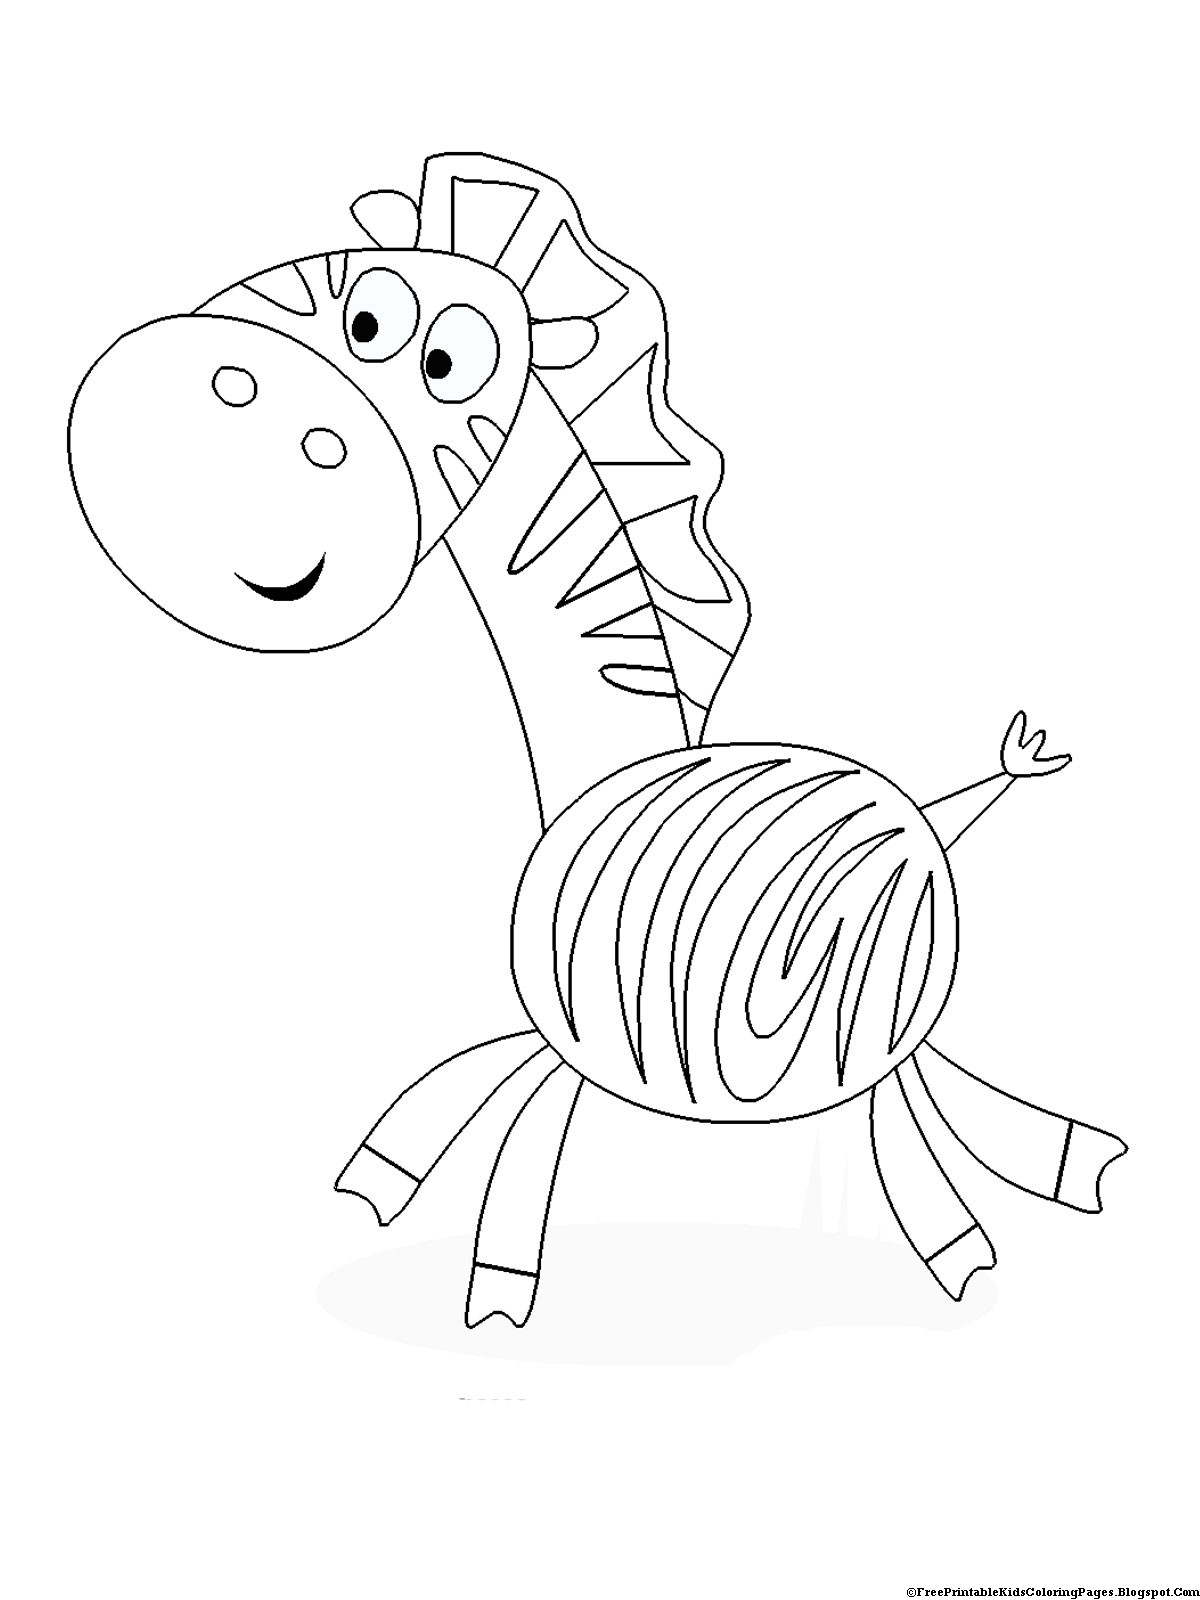 Coloring Pages For Children
 Zebra Coloring Pages